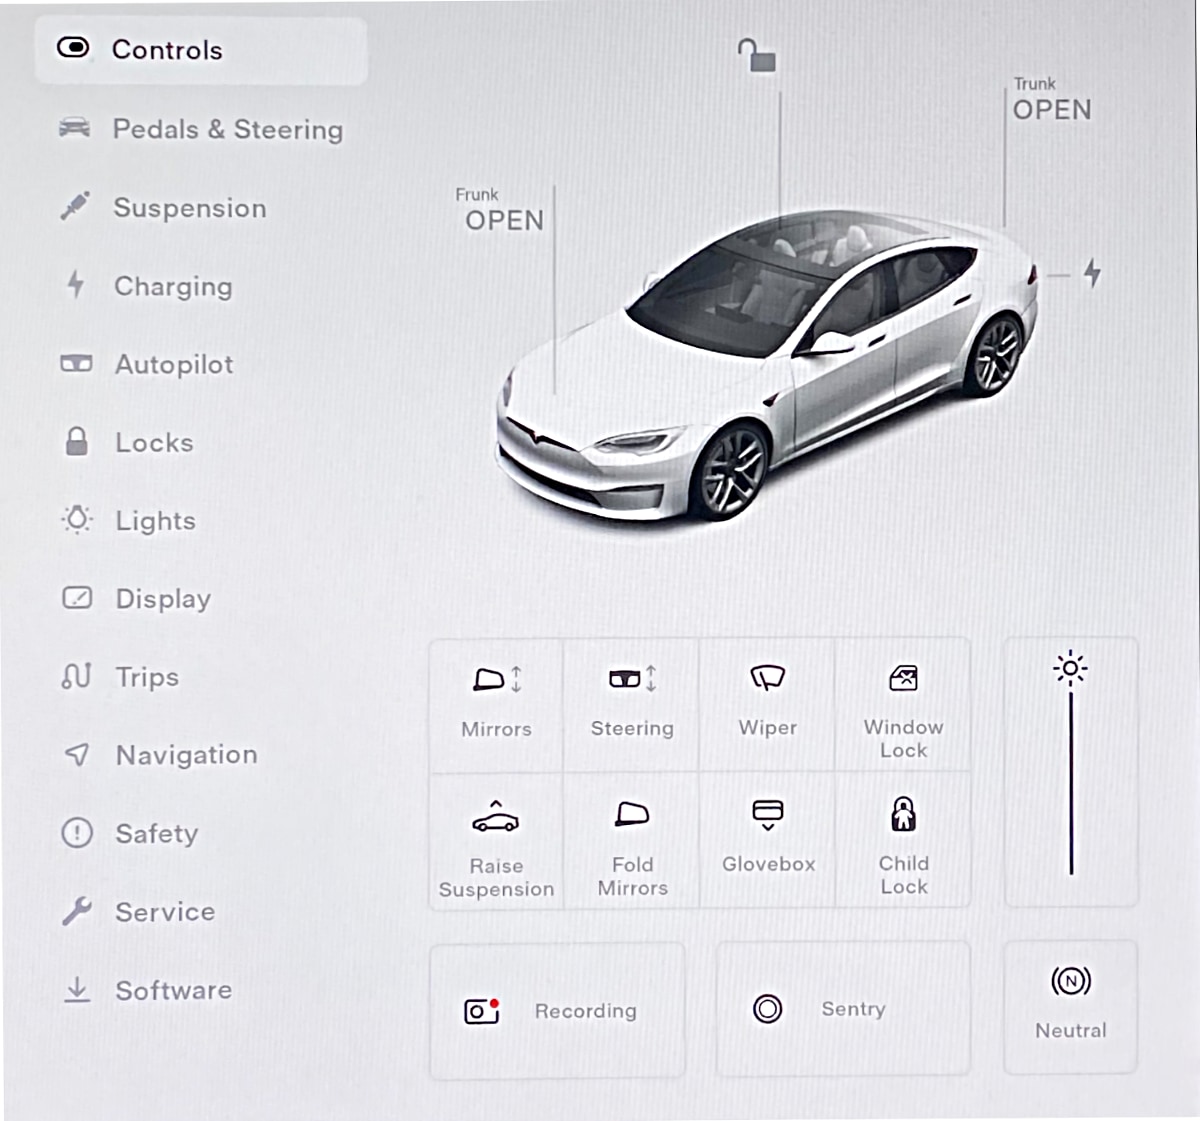 Tesla Redesigned Controls Panel feature in update 2021.32.22